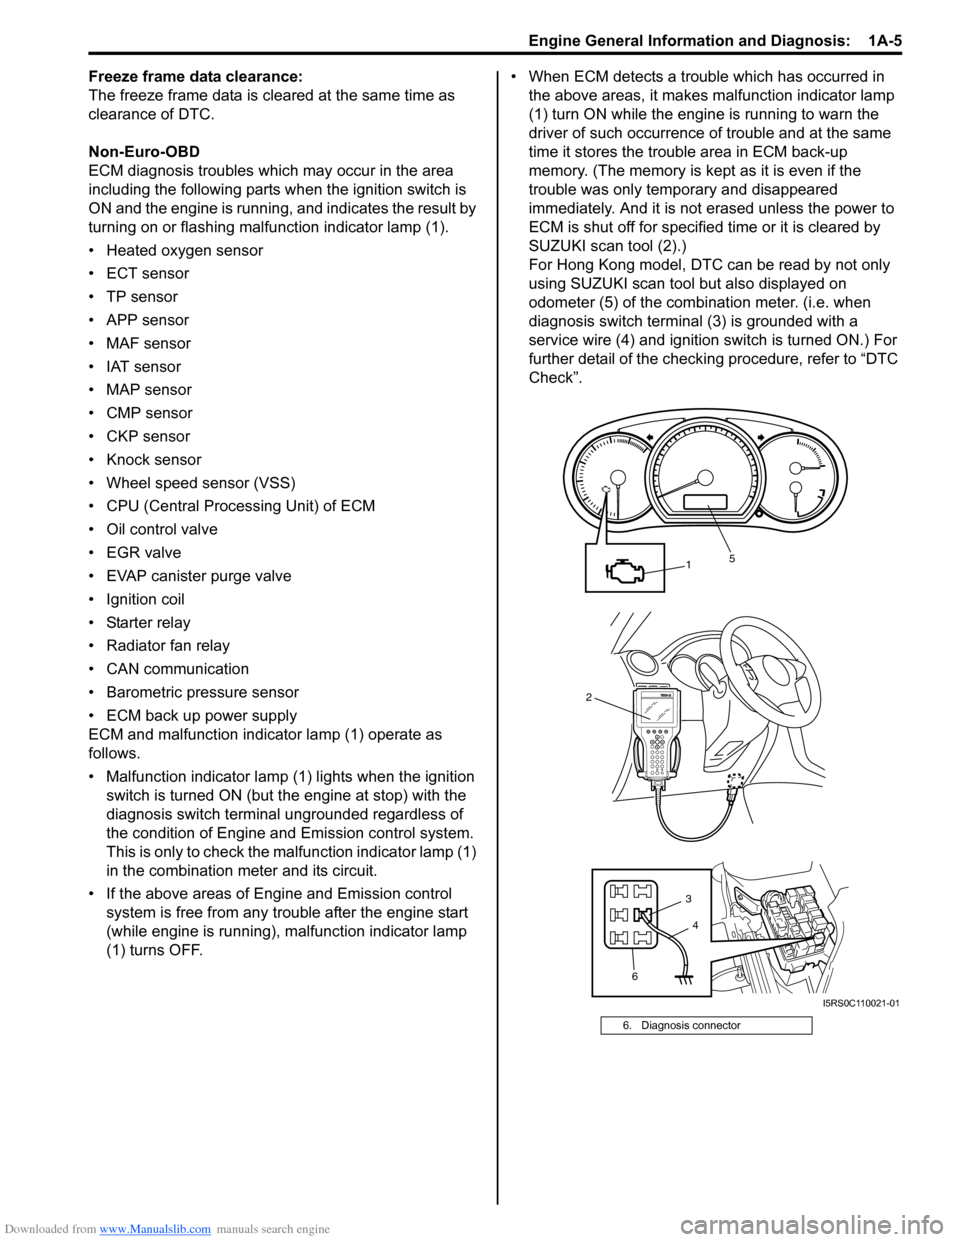 SUZUKI SWIFT 2007 2.G Service Workshop Manual Downloaded from www.Manualslib.com manuals search engine Engine General Information and Diagnosis:  1A-5
Freeze frame data clearance:
The freeze frame data is cleared at the same time as 
clearance of